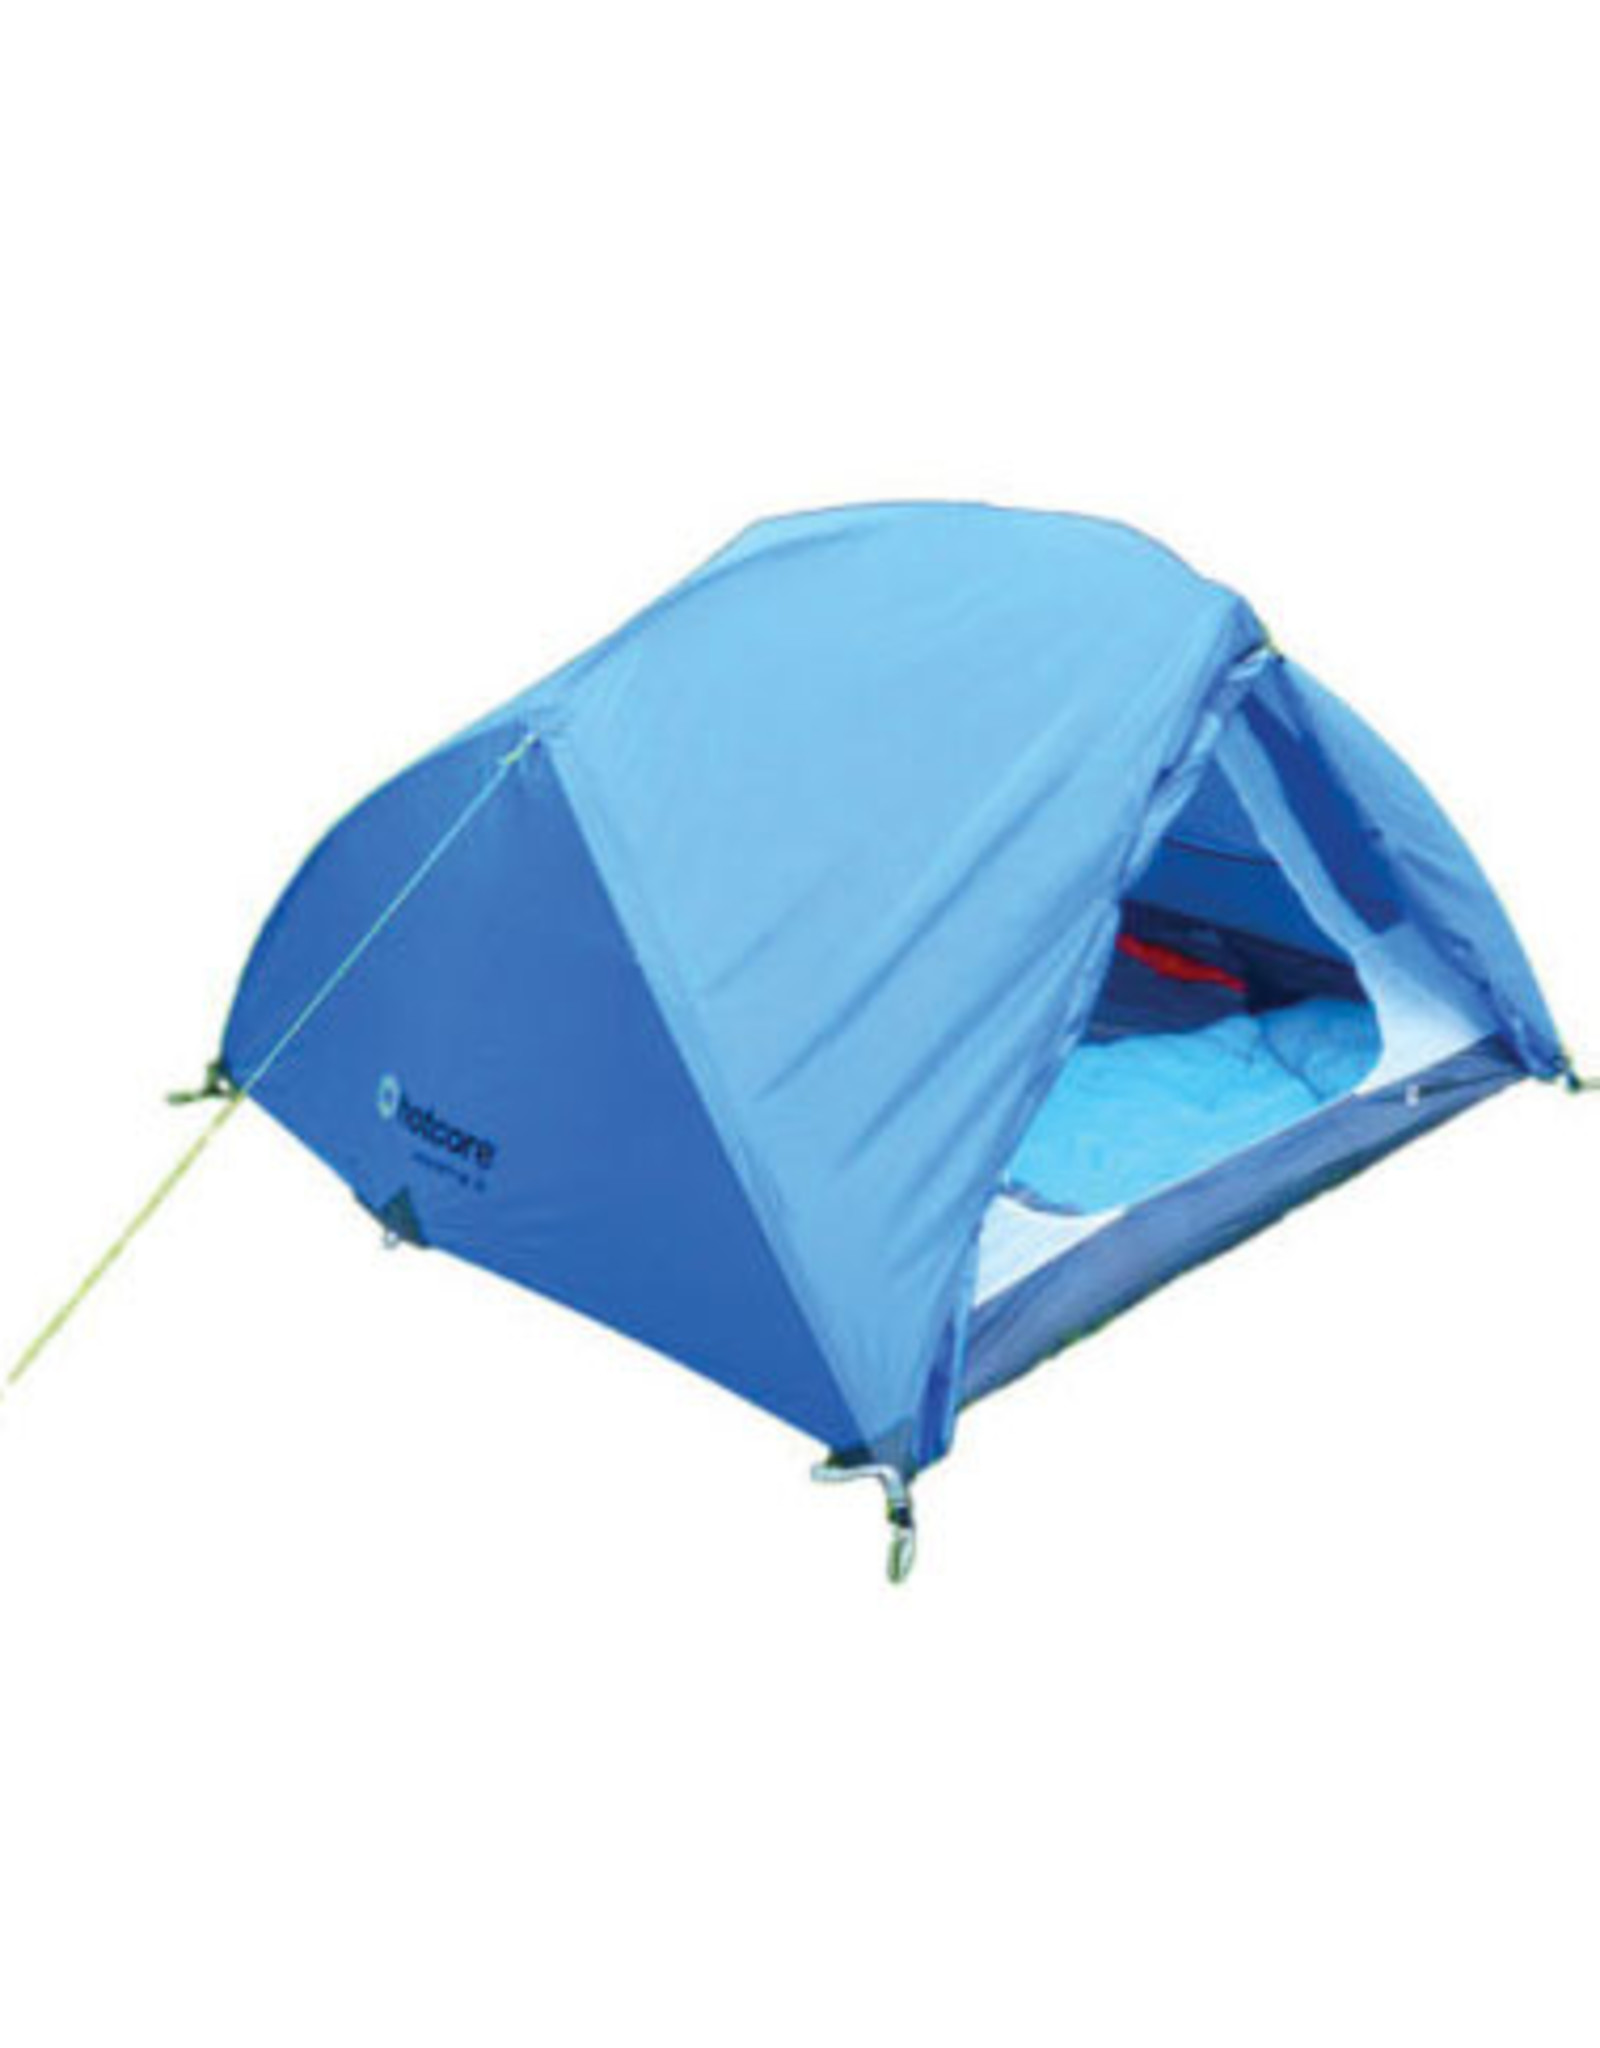 Hotcore Outdoor Products Hotcore Mantis 2 Tent Blue